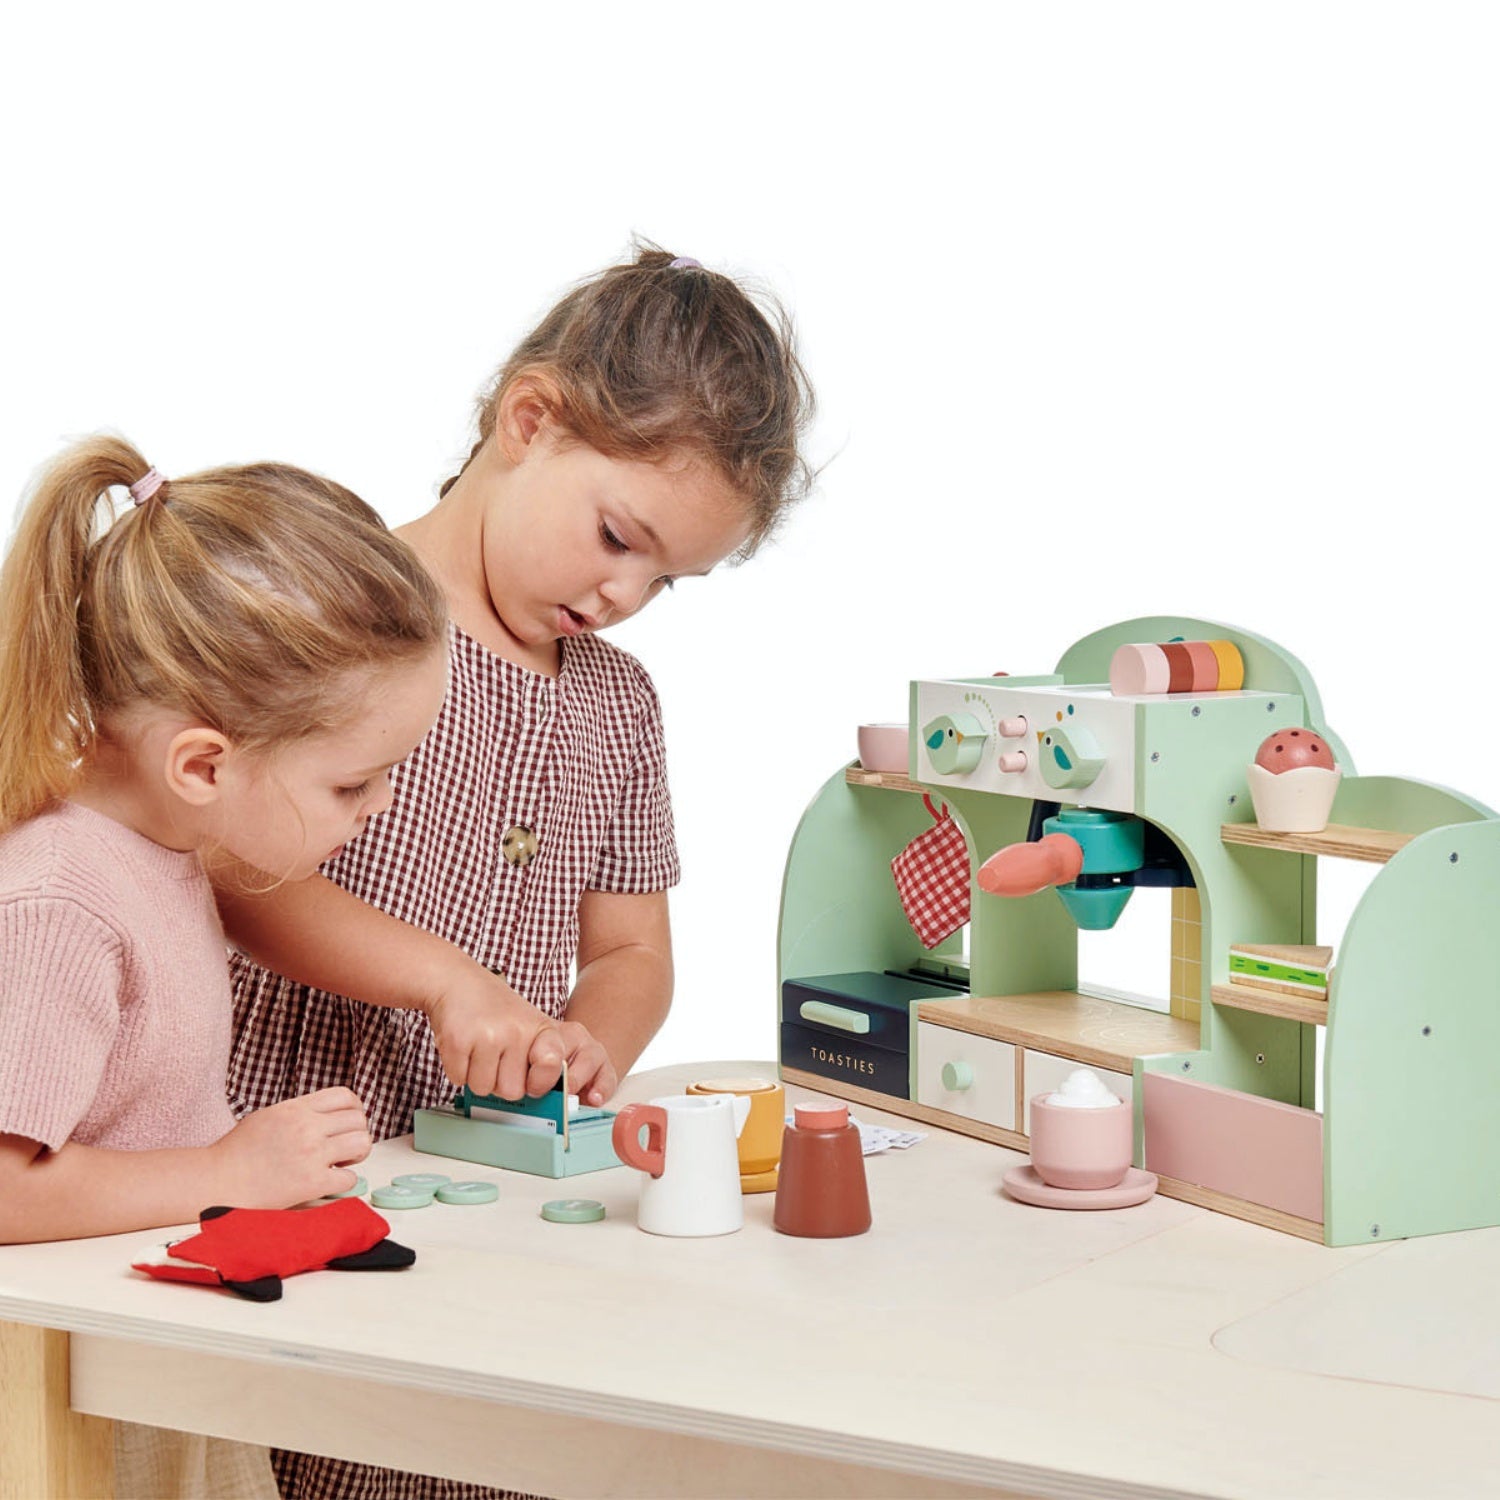 Tender Leaf Toys Bird’s Nest Café | Wooden Role Play Toy Café for Kids | Inspires Pretend Play | Lifestyle – 2 Girls Playing with Café | BeoVERDE.ie